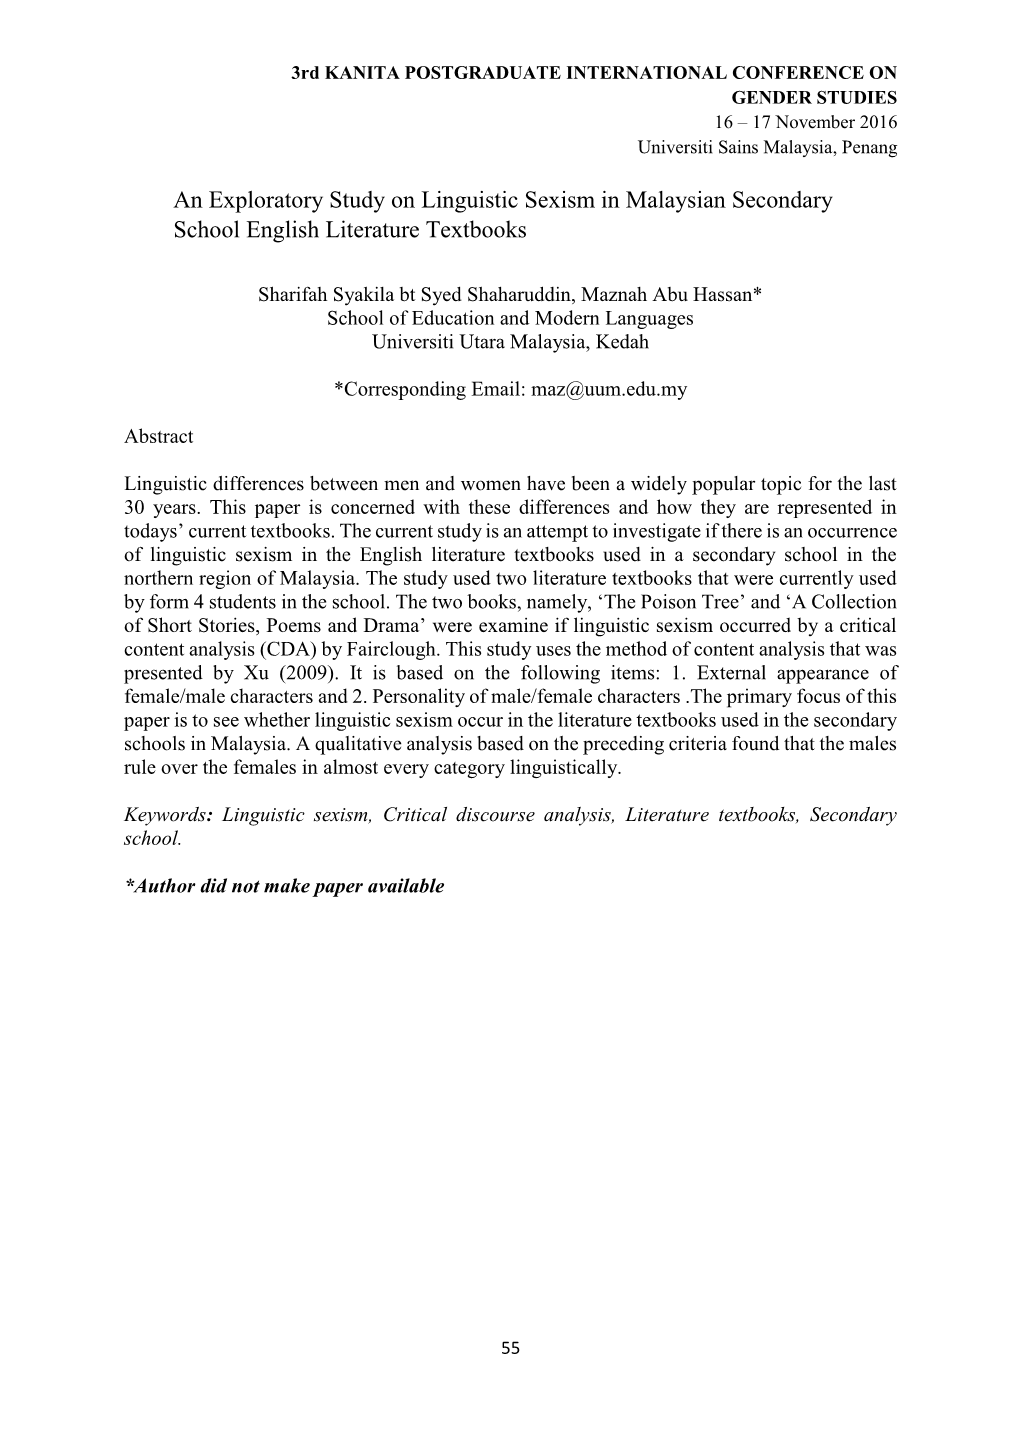 An Exploratory Study on Linguistic Sexism in Malaysian Secondary School English Literature Textbooks